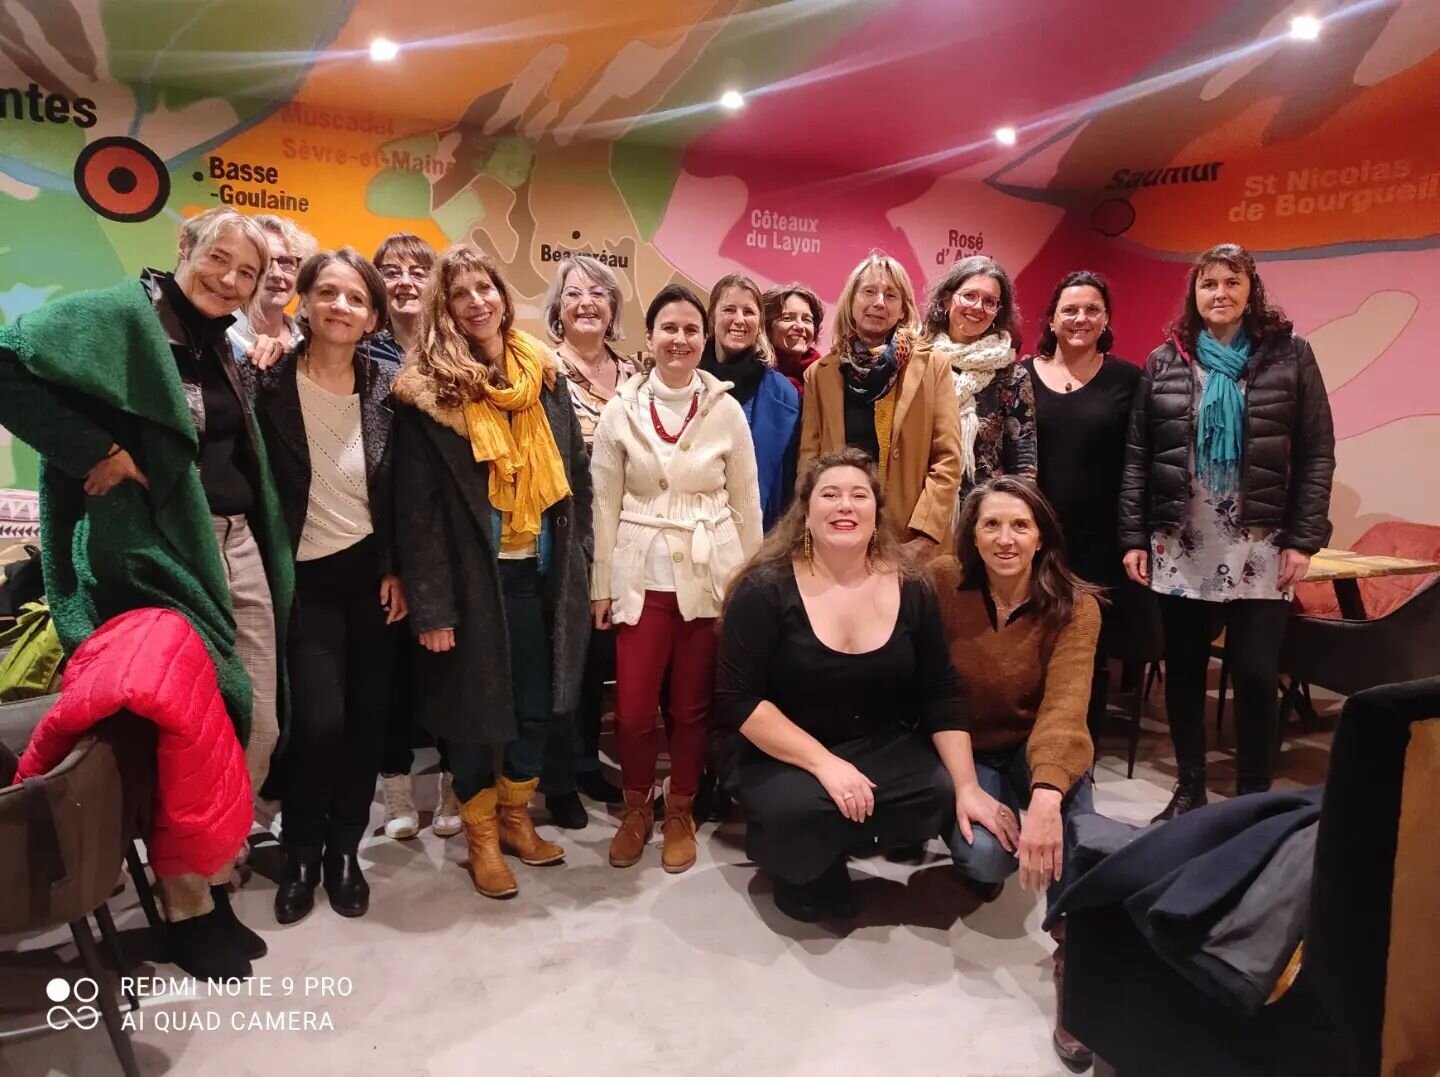 A great MERCI to @femmesdebretagne for hosting a #voxlabmg workshop  based on the voice, oral skills and public speaking. 
Great conversations, great audience, great location (shout-out to @lacantineduvignoble for having us)
What a great way to start